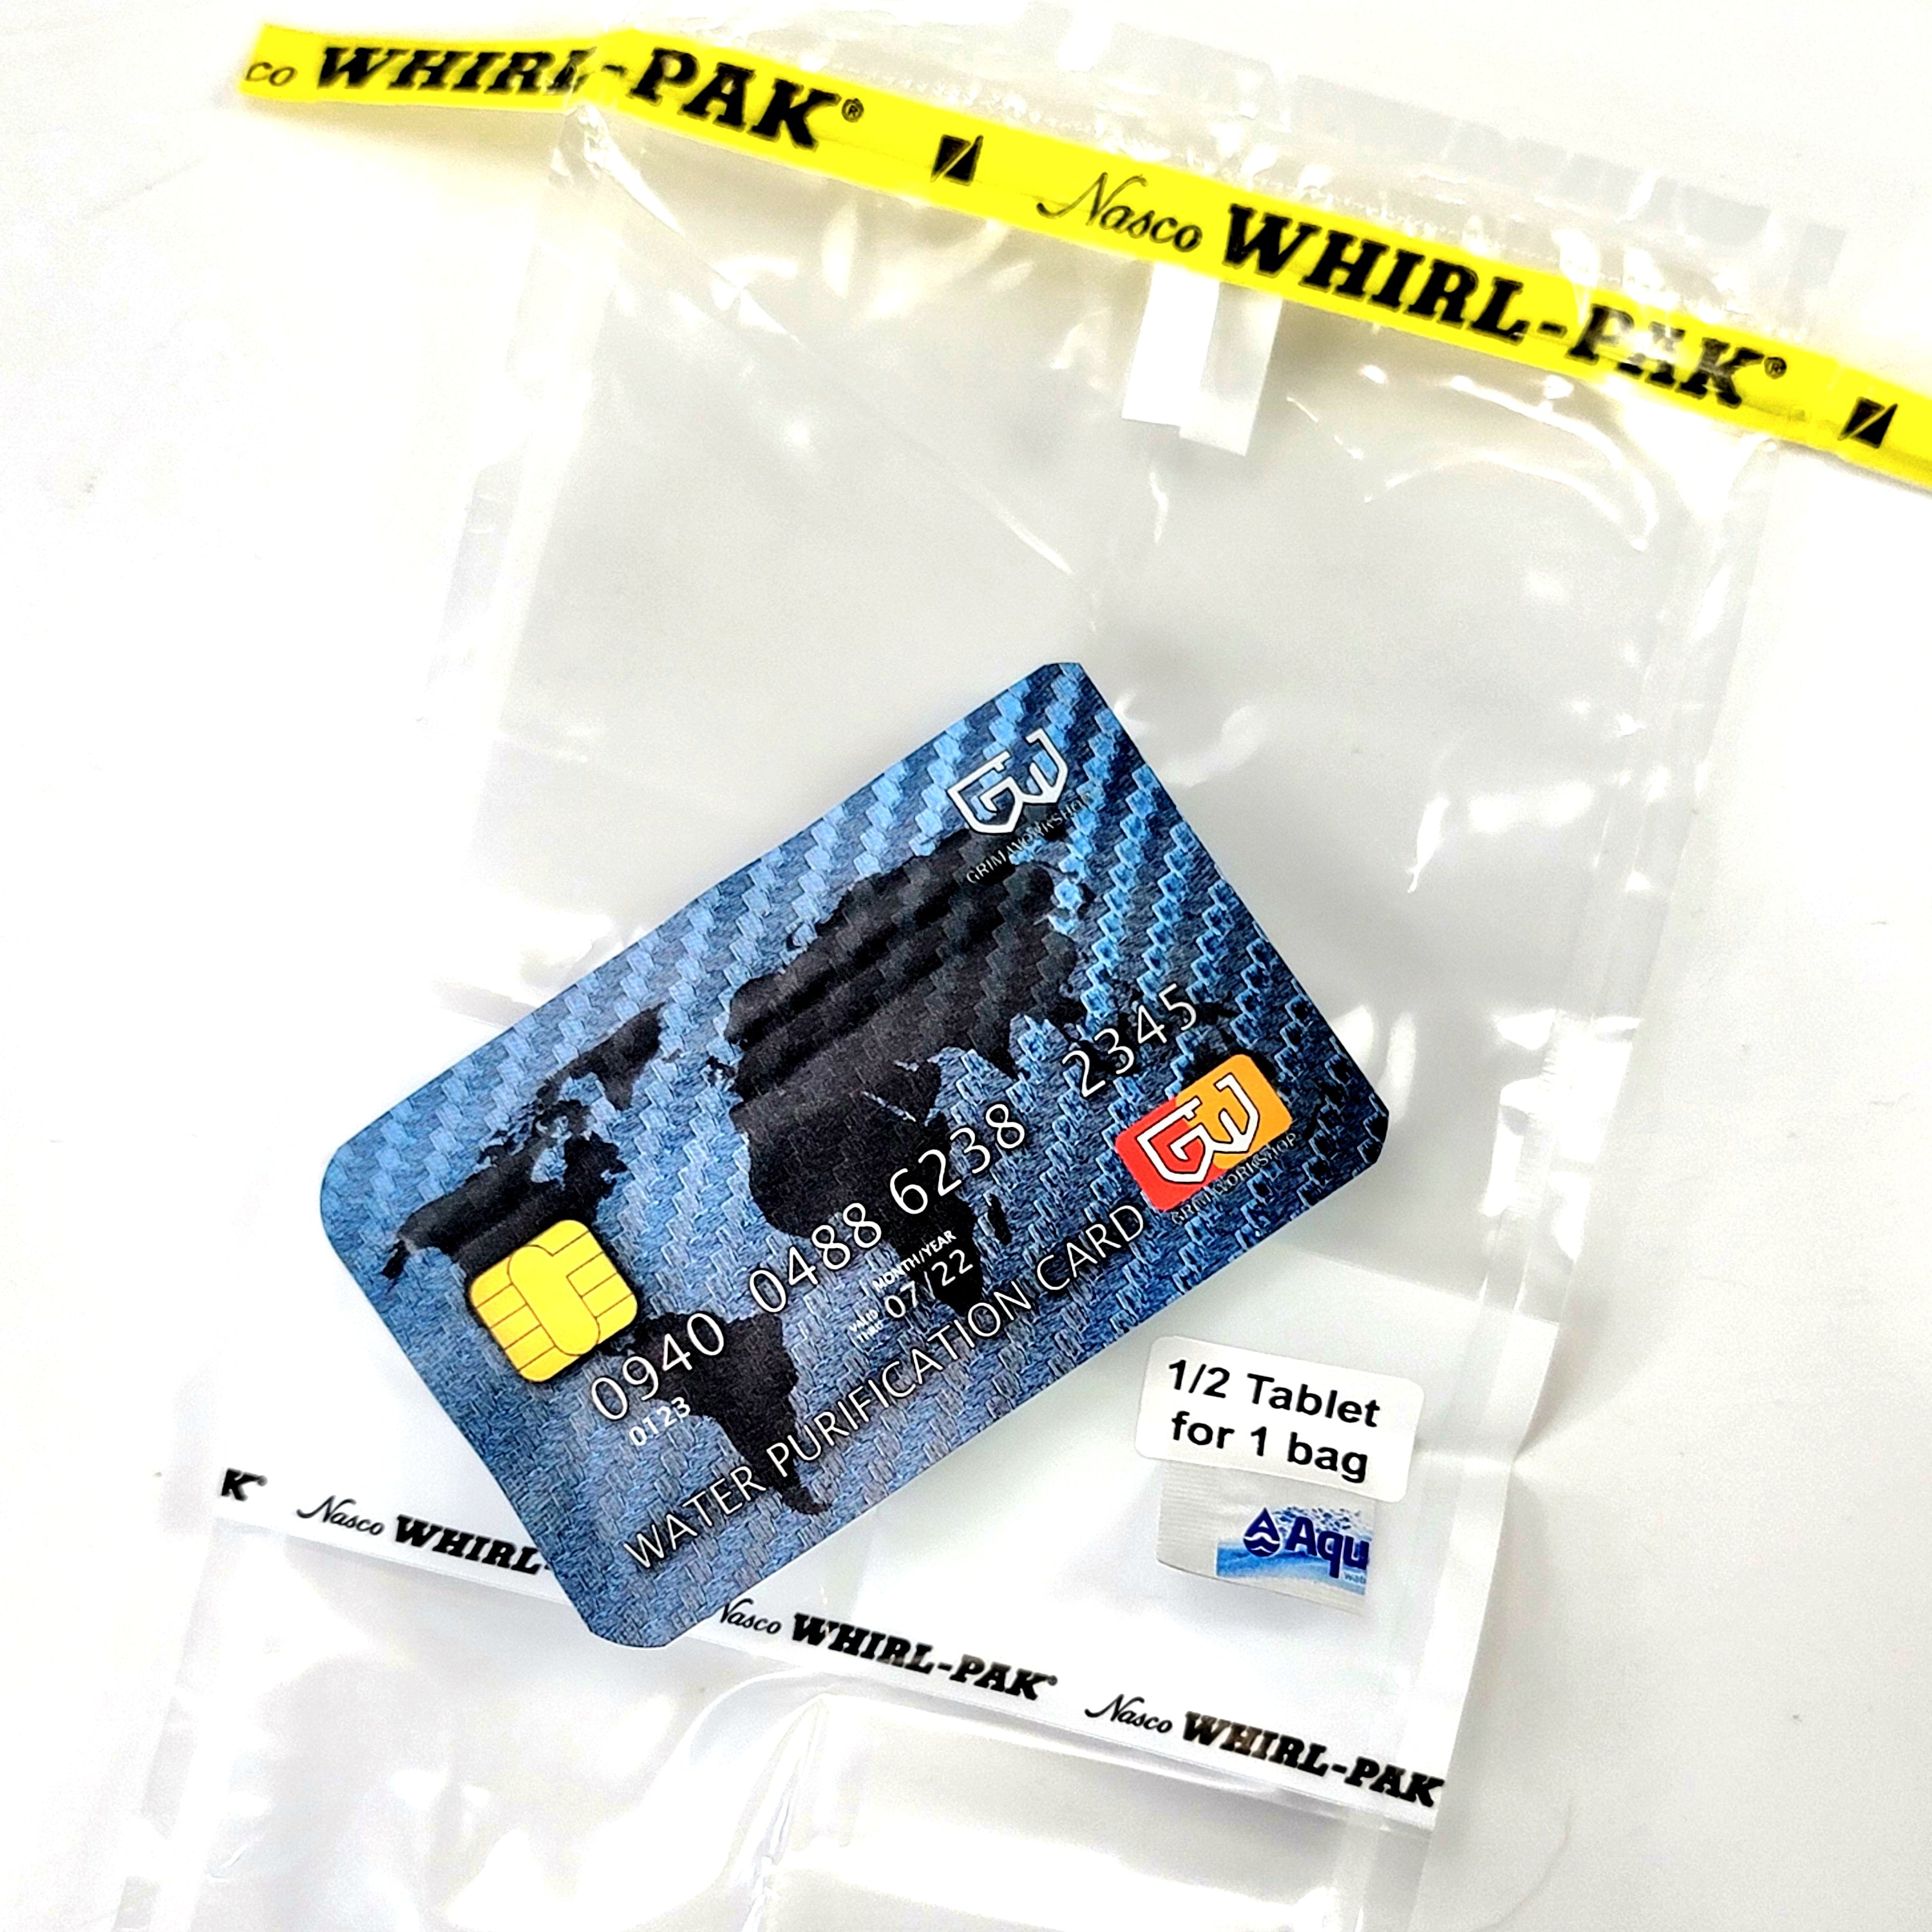 With the water card you can turn your Wallet into a Water Purification Kit with the Water Survival Kit Card